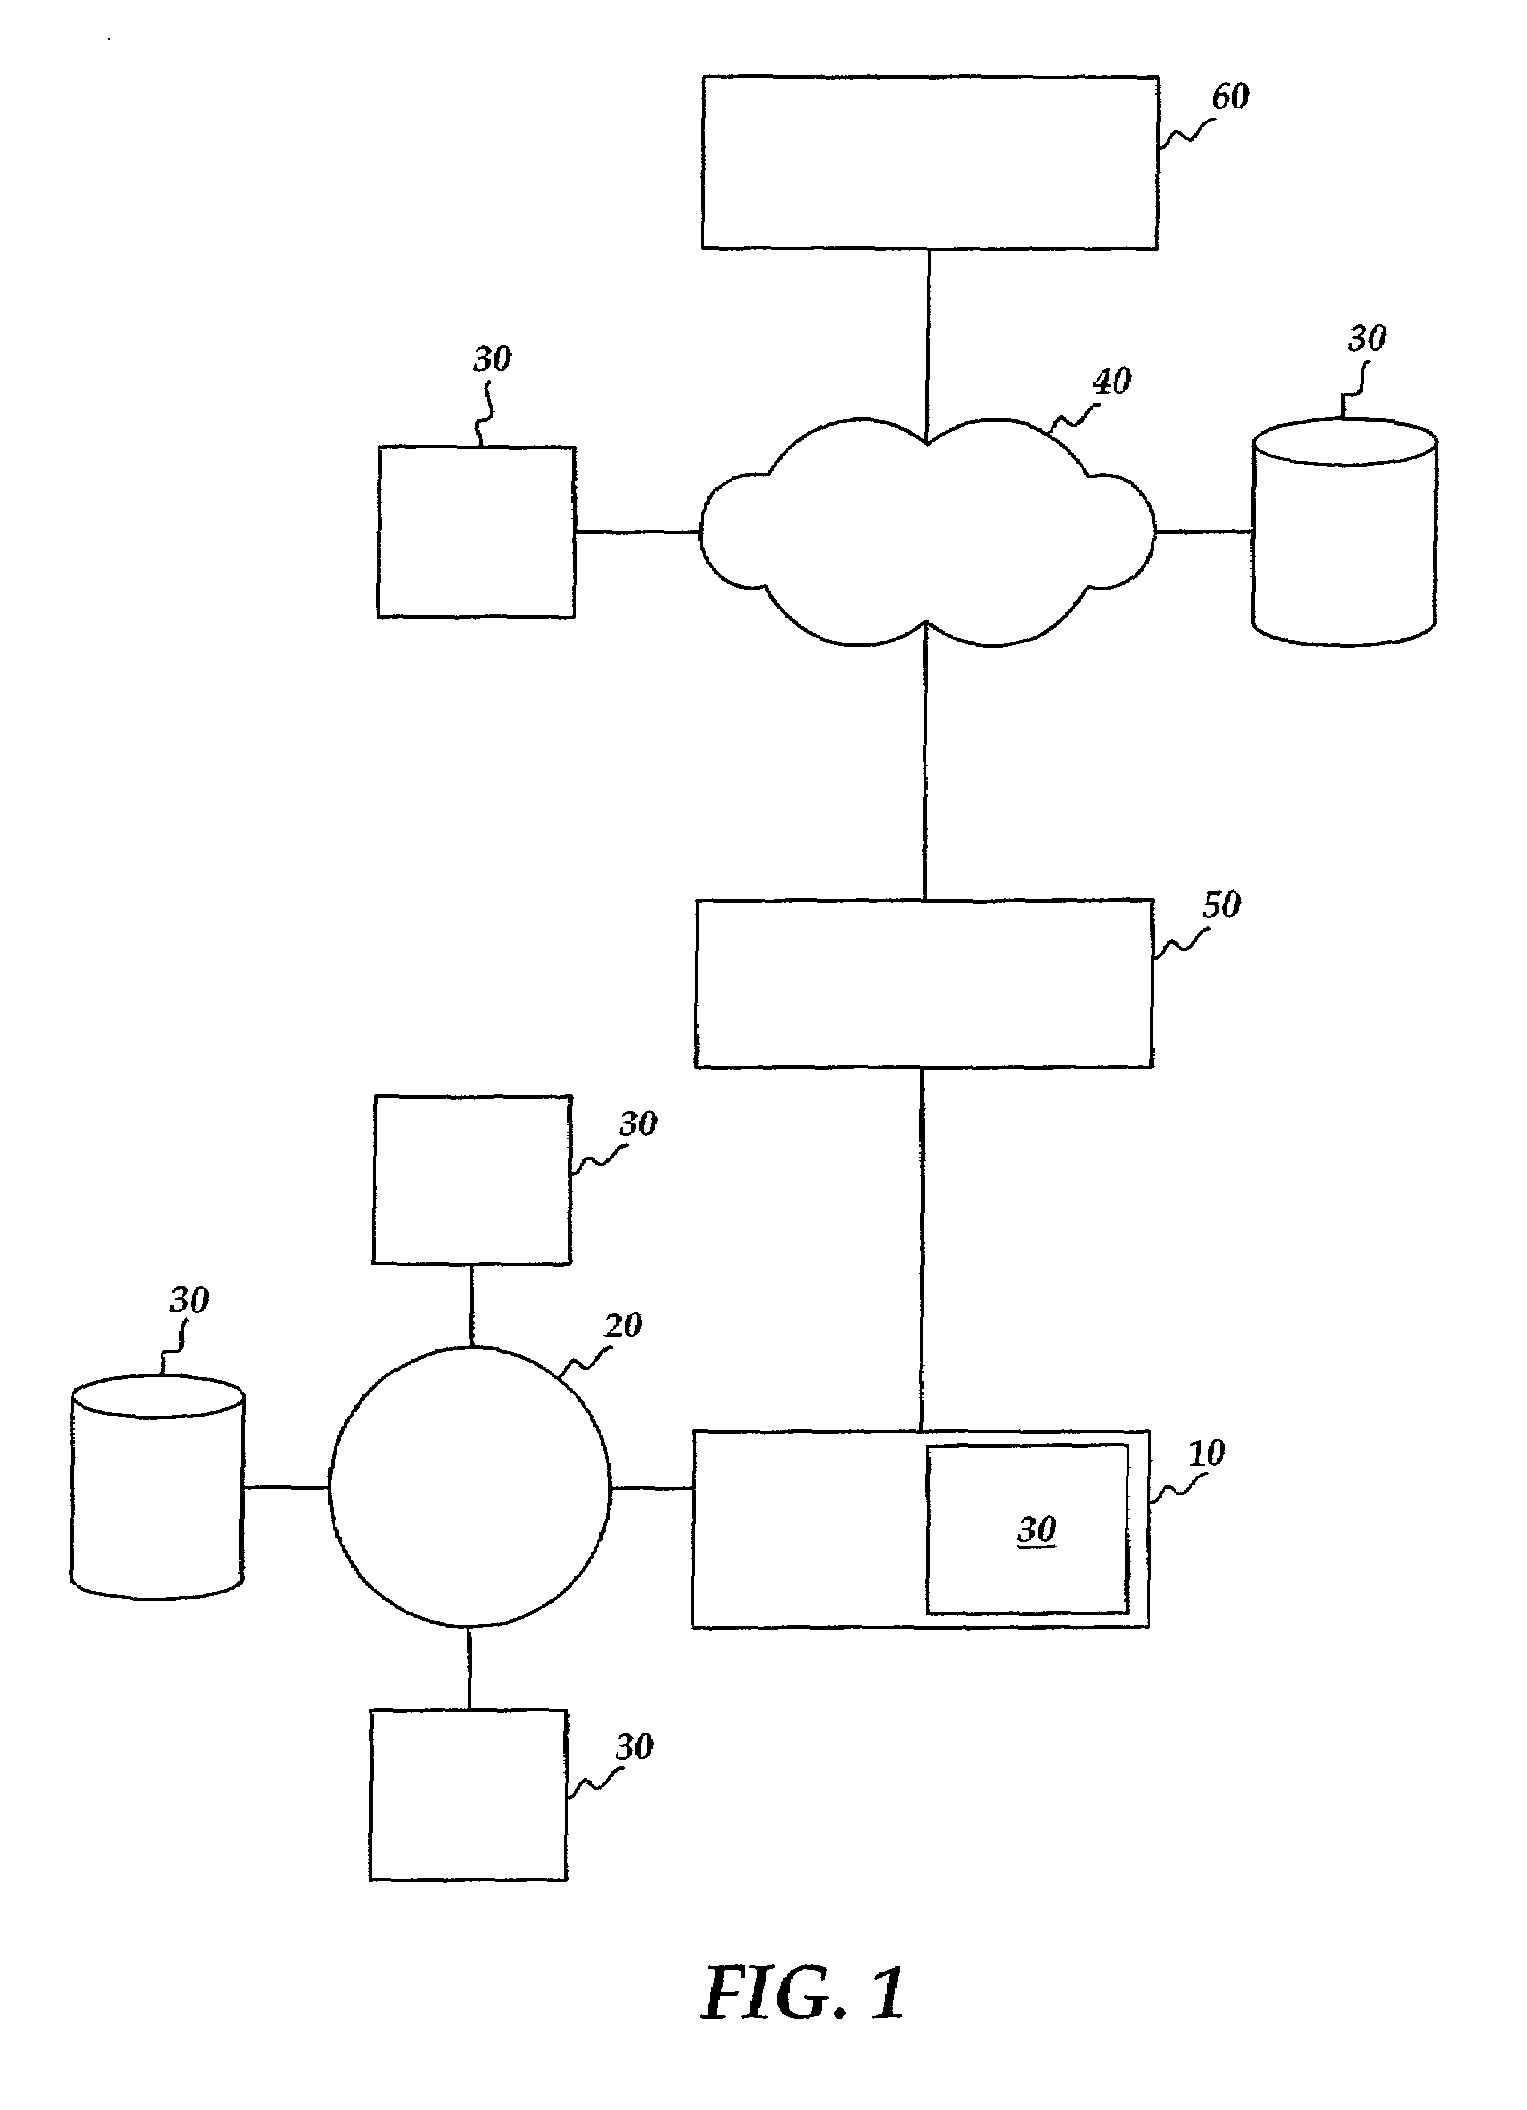 Remote authentication caching on a trusted client or gateway system